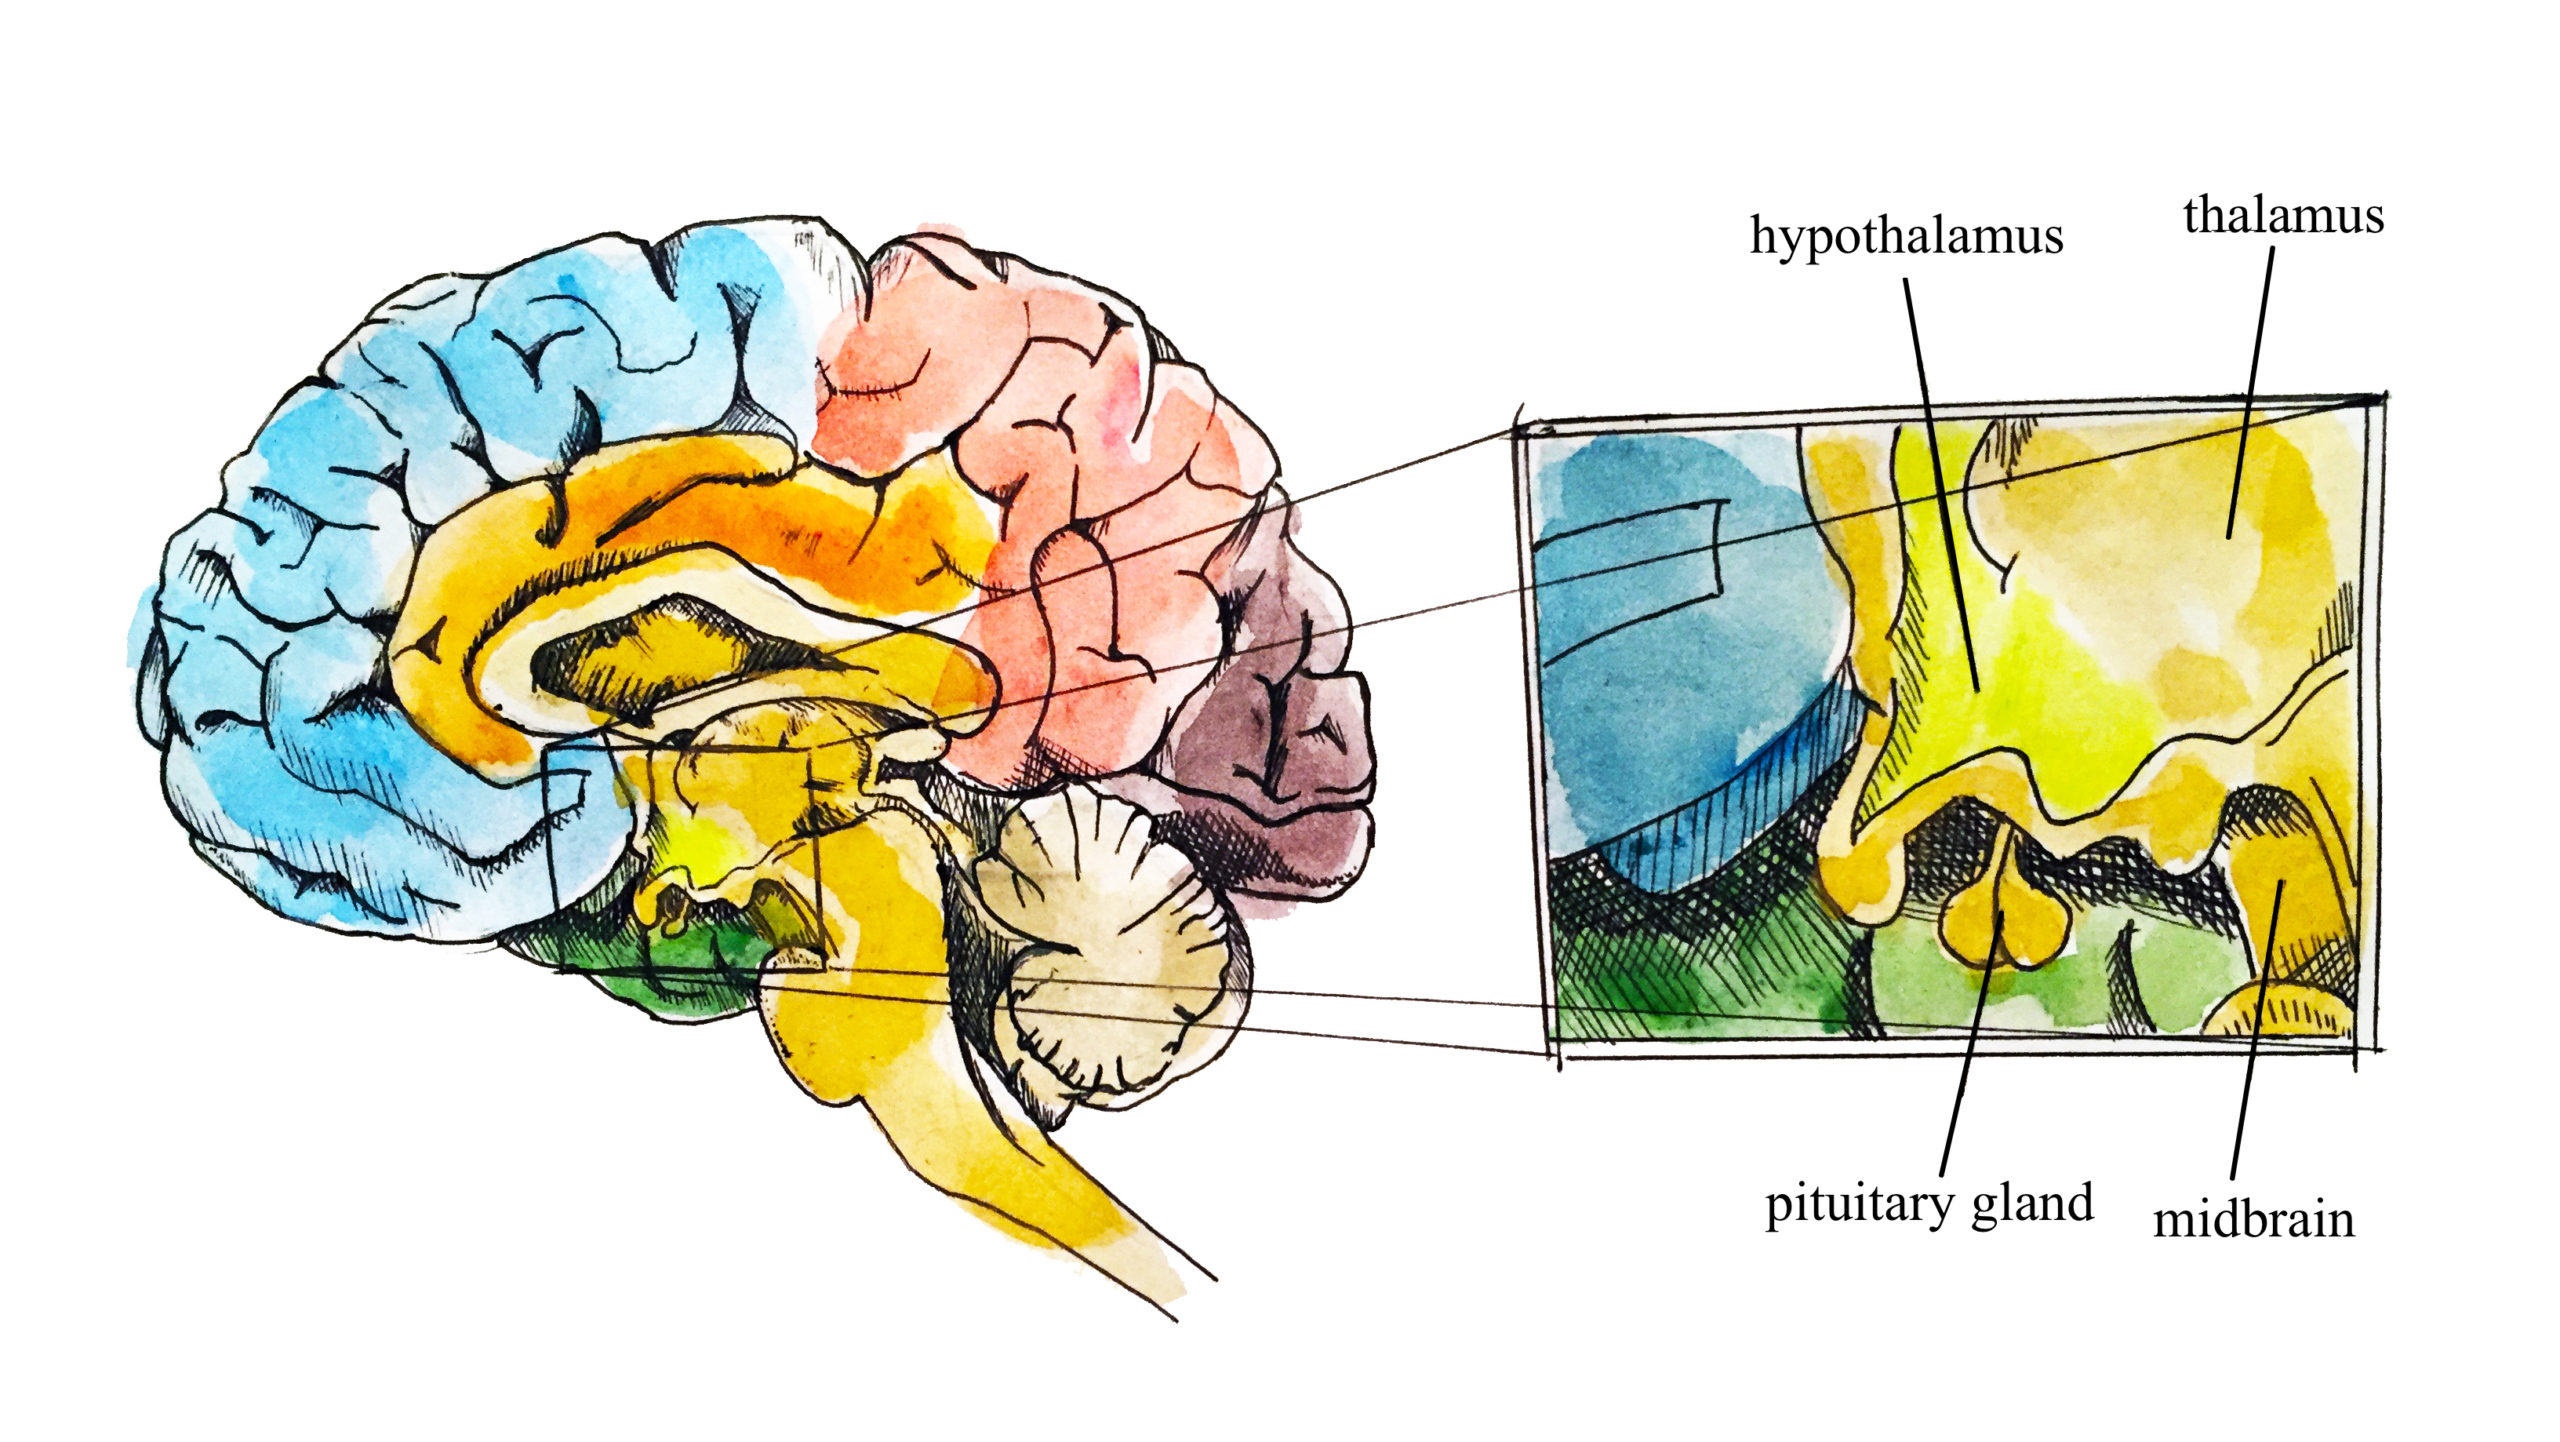 Position of the area of the hypothalamus in the brain in relation to the thalamus, mid-brain and pituitary gland